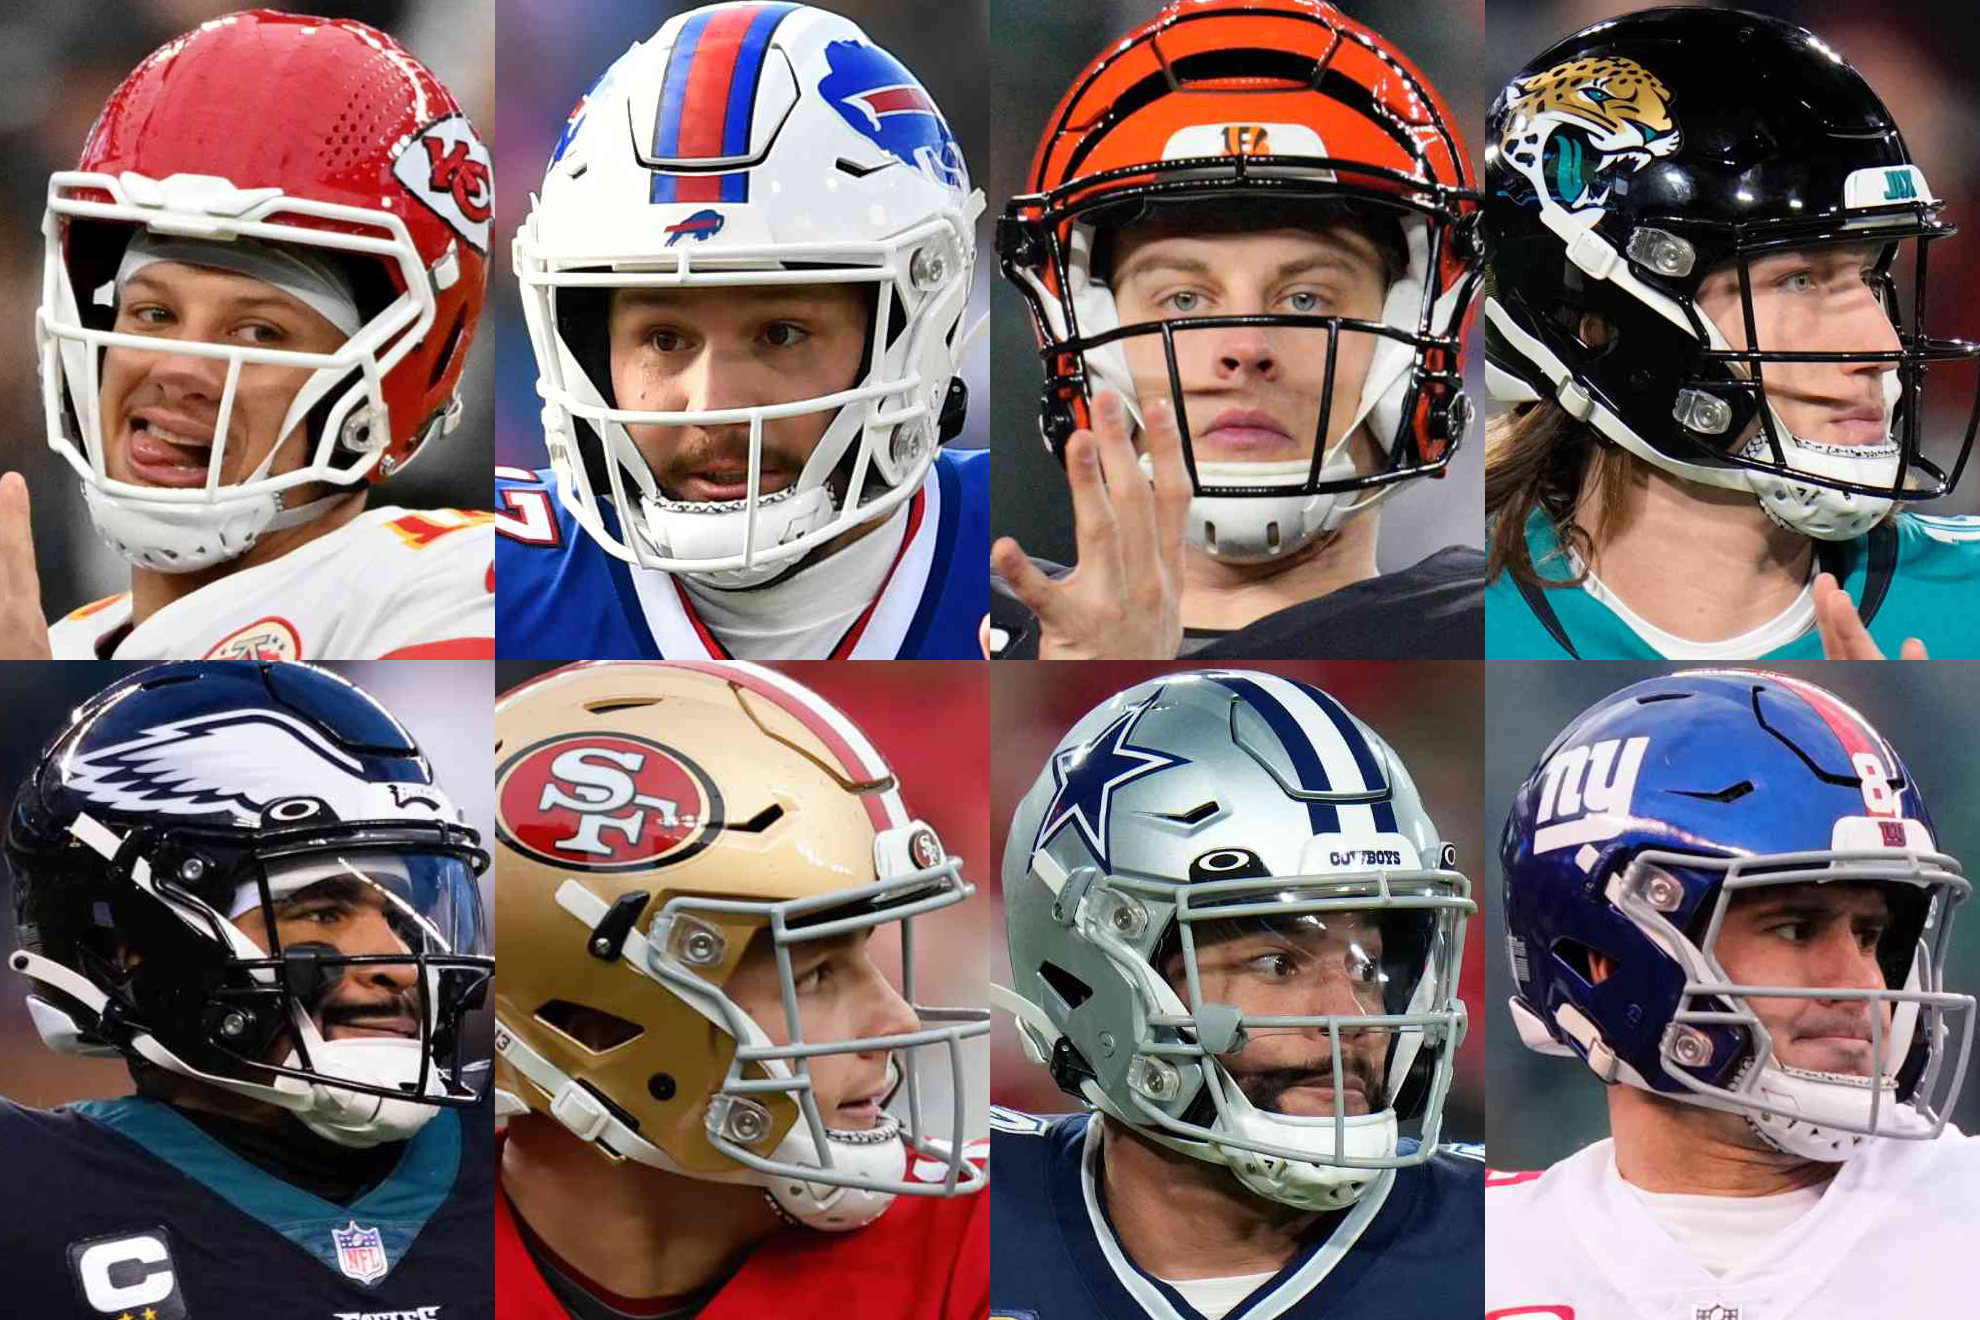 In a development worthy of serious reflection, Patrick Mahomes, Josh Allen, Joe Burrow, Trevor Lawrence, Jalen Hurts, Brock Purdy, Dak Prescott and Daniel Jones were picked in the Draft by the teams they represent in the Divisional Round of the NFL playoffs.